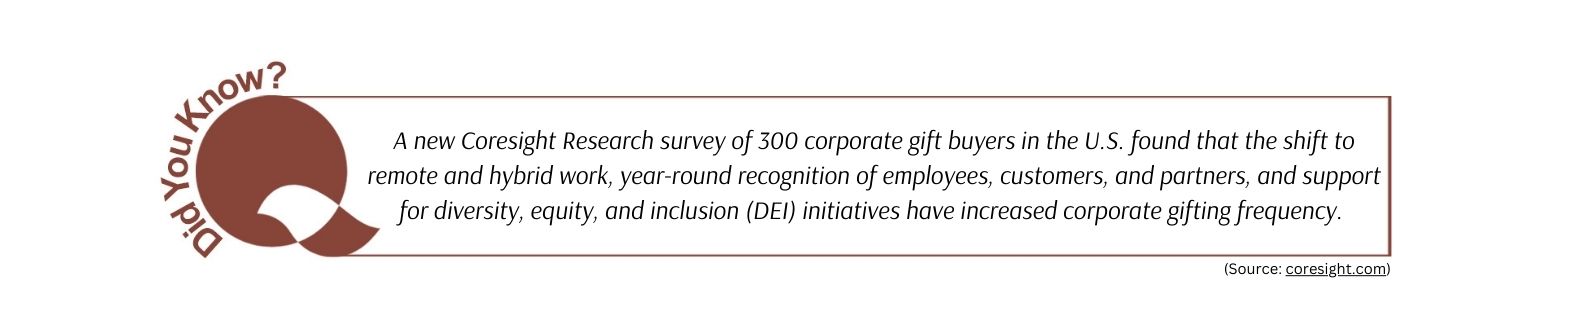 A new Coresight Research survey of 300 corporate gift buyers in the U.S. found that the shift to remote and hybrid work, year-round recognition of employees, customers, and partners, and support for diversity, equity, and inclusion (DEI) initiatives have increased corporate gifting frequency.